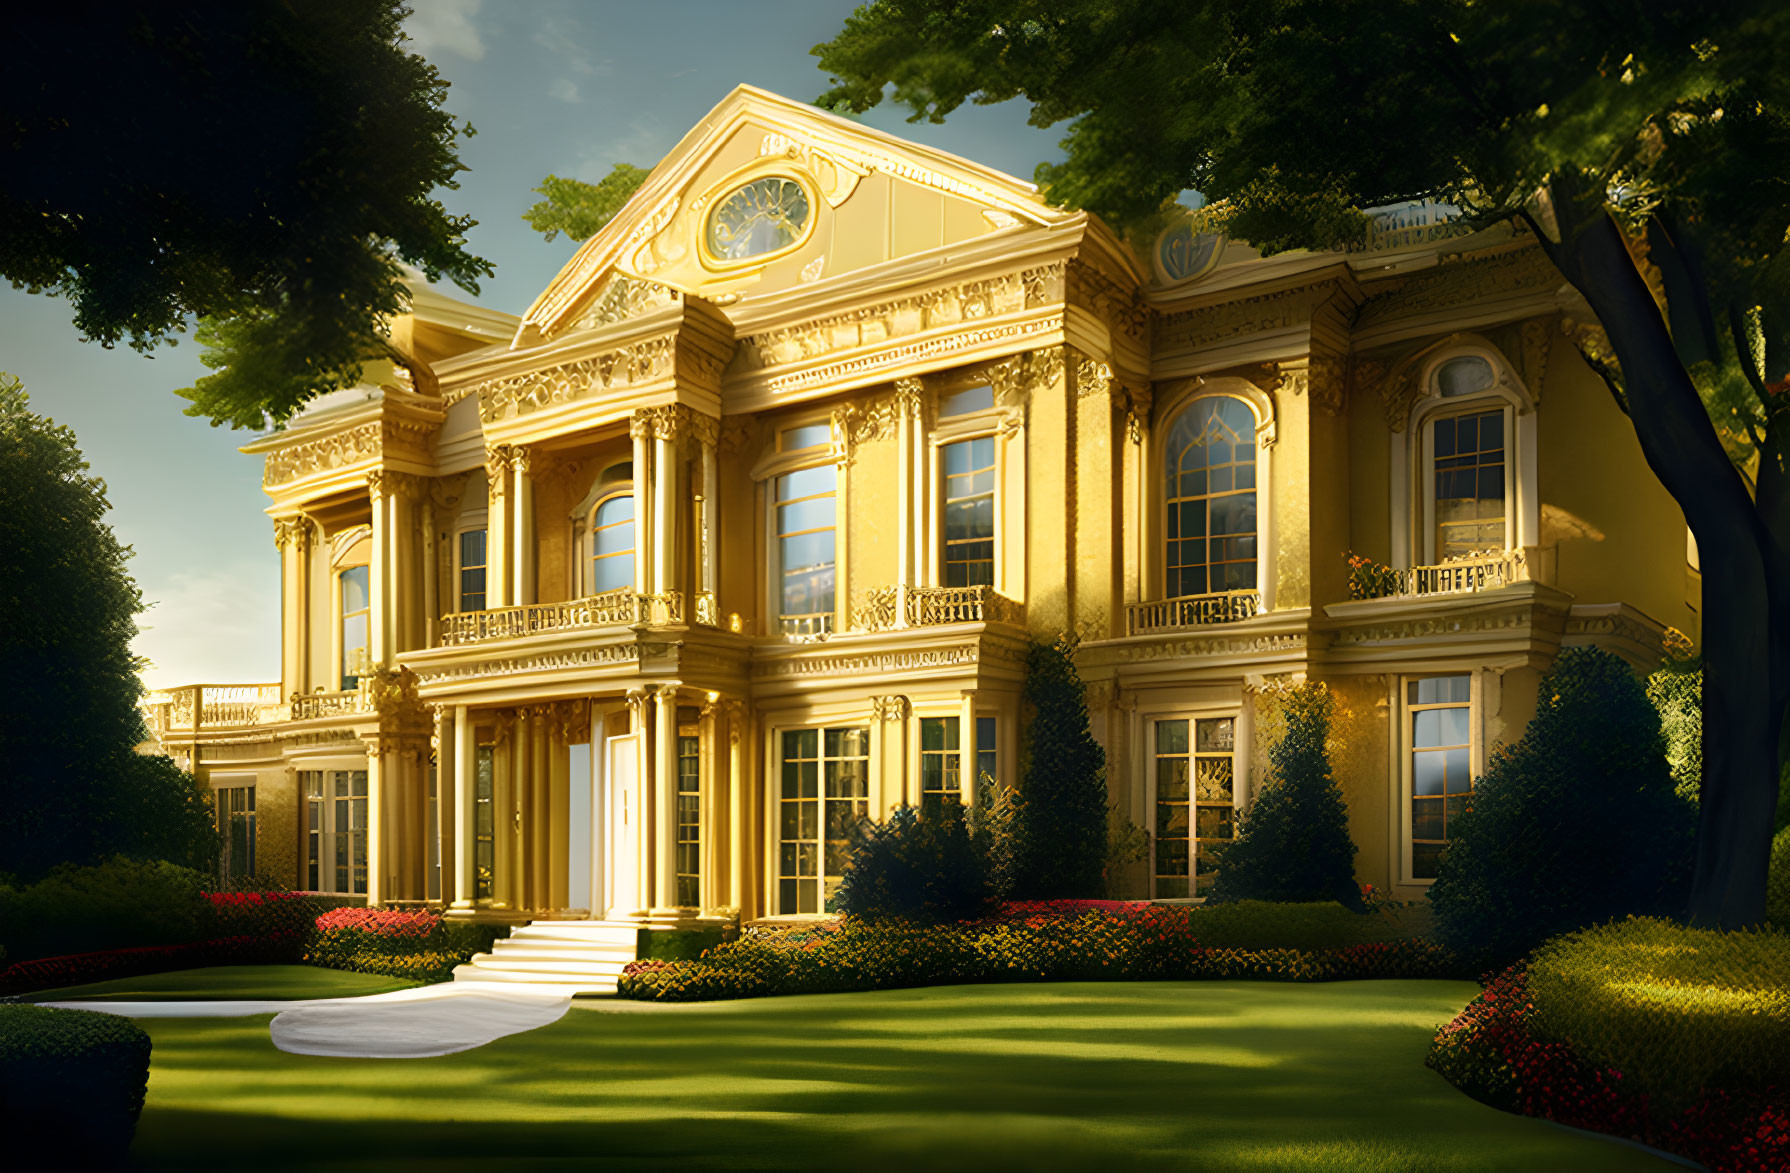 Elegant classical mansion in sunlight with ornate gardens